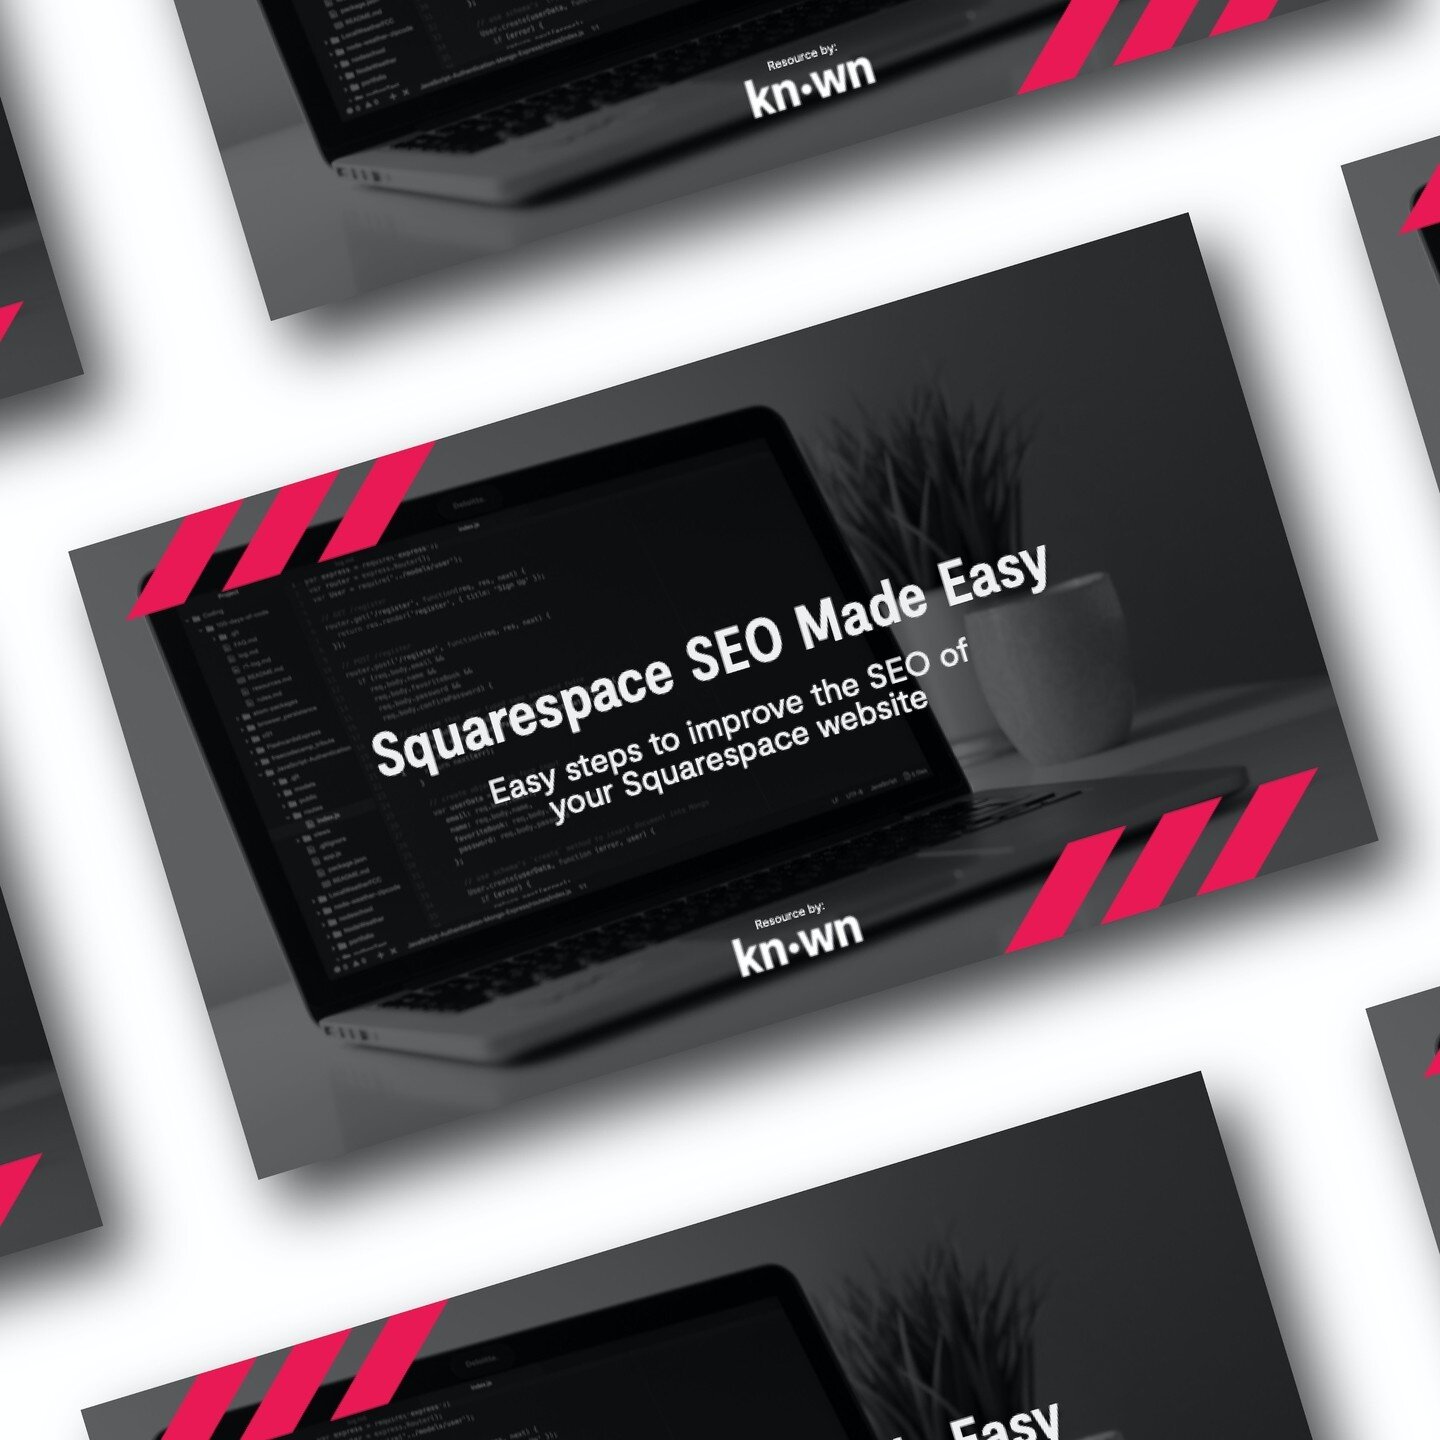 SEO Frustration is OPTIONAL.

Squarespace has so many SEO features baked into it, but many businesses neglect to do the basics and suffer as a result.

We created this guide, Squarespace SEO Made Easy, for folks like you to make sure that you&rsquo;v